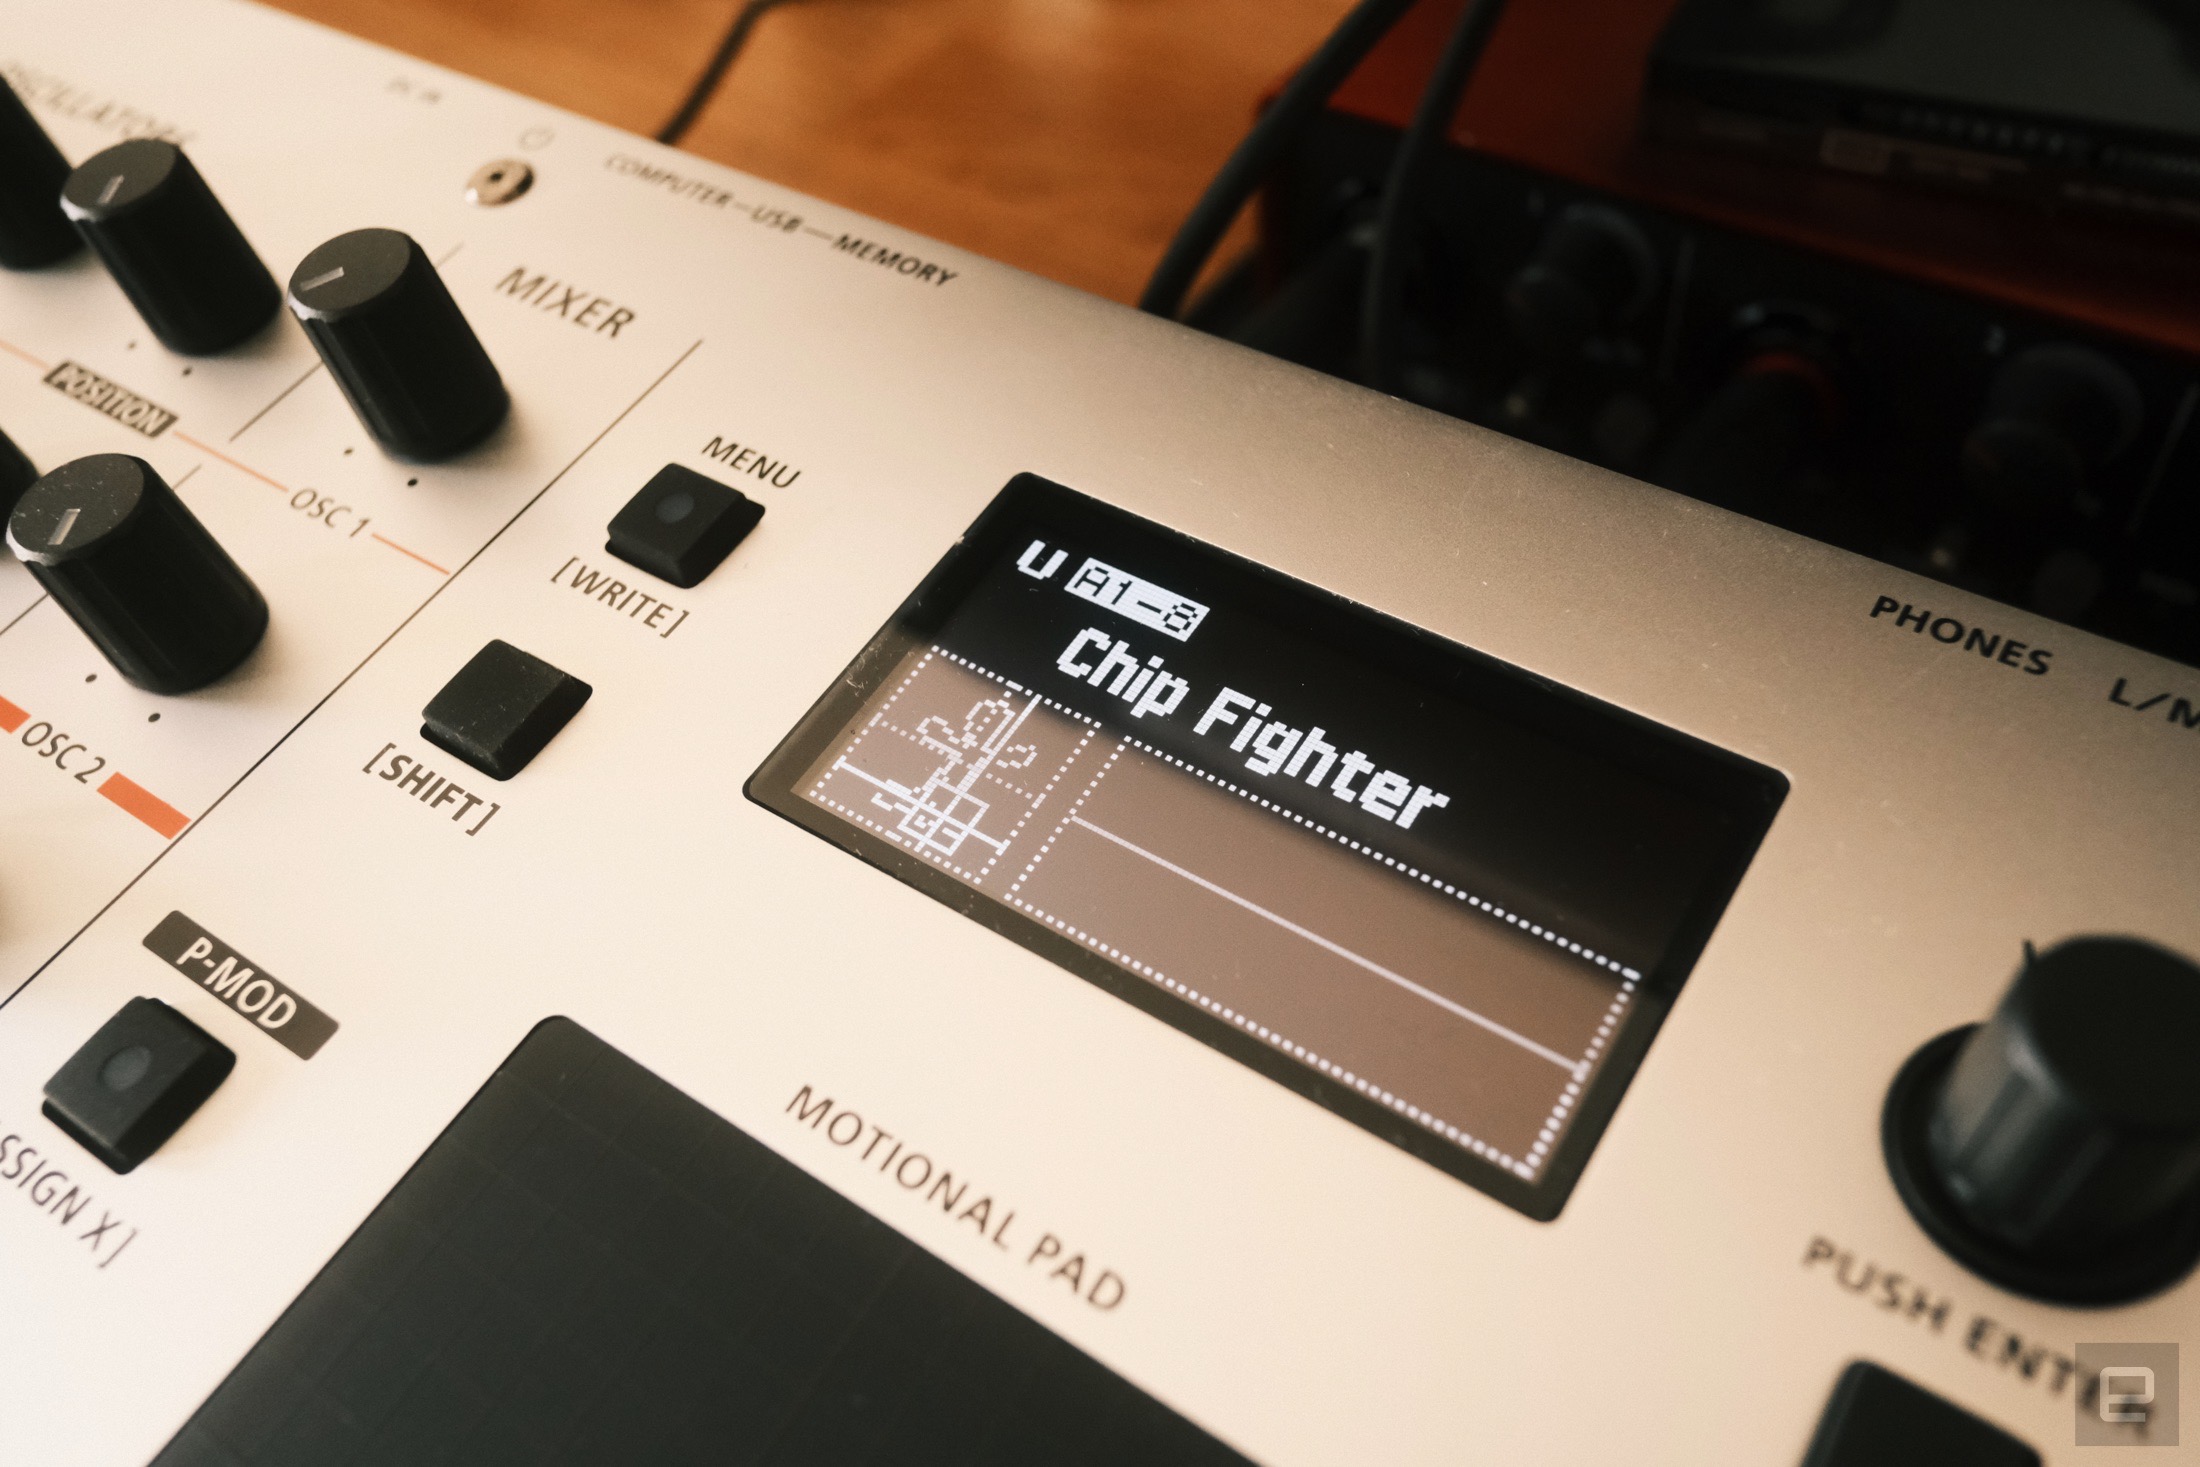 The Chip Fighter patch on the Roland Gaia 2 shows the automatic sketching of a small character.